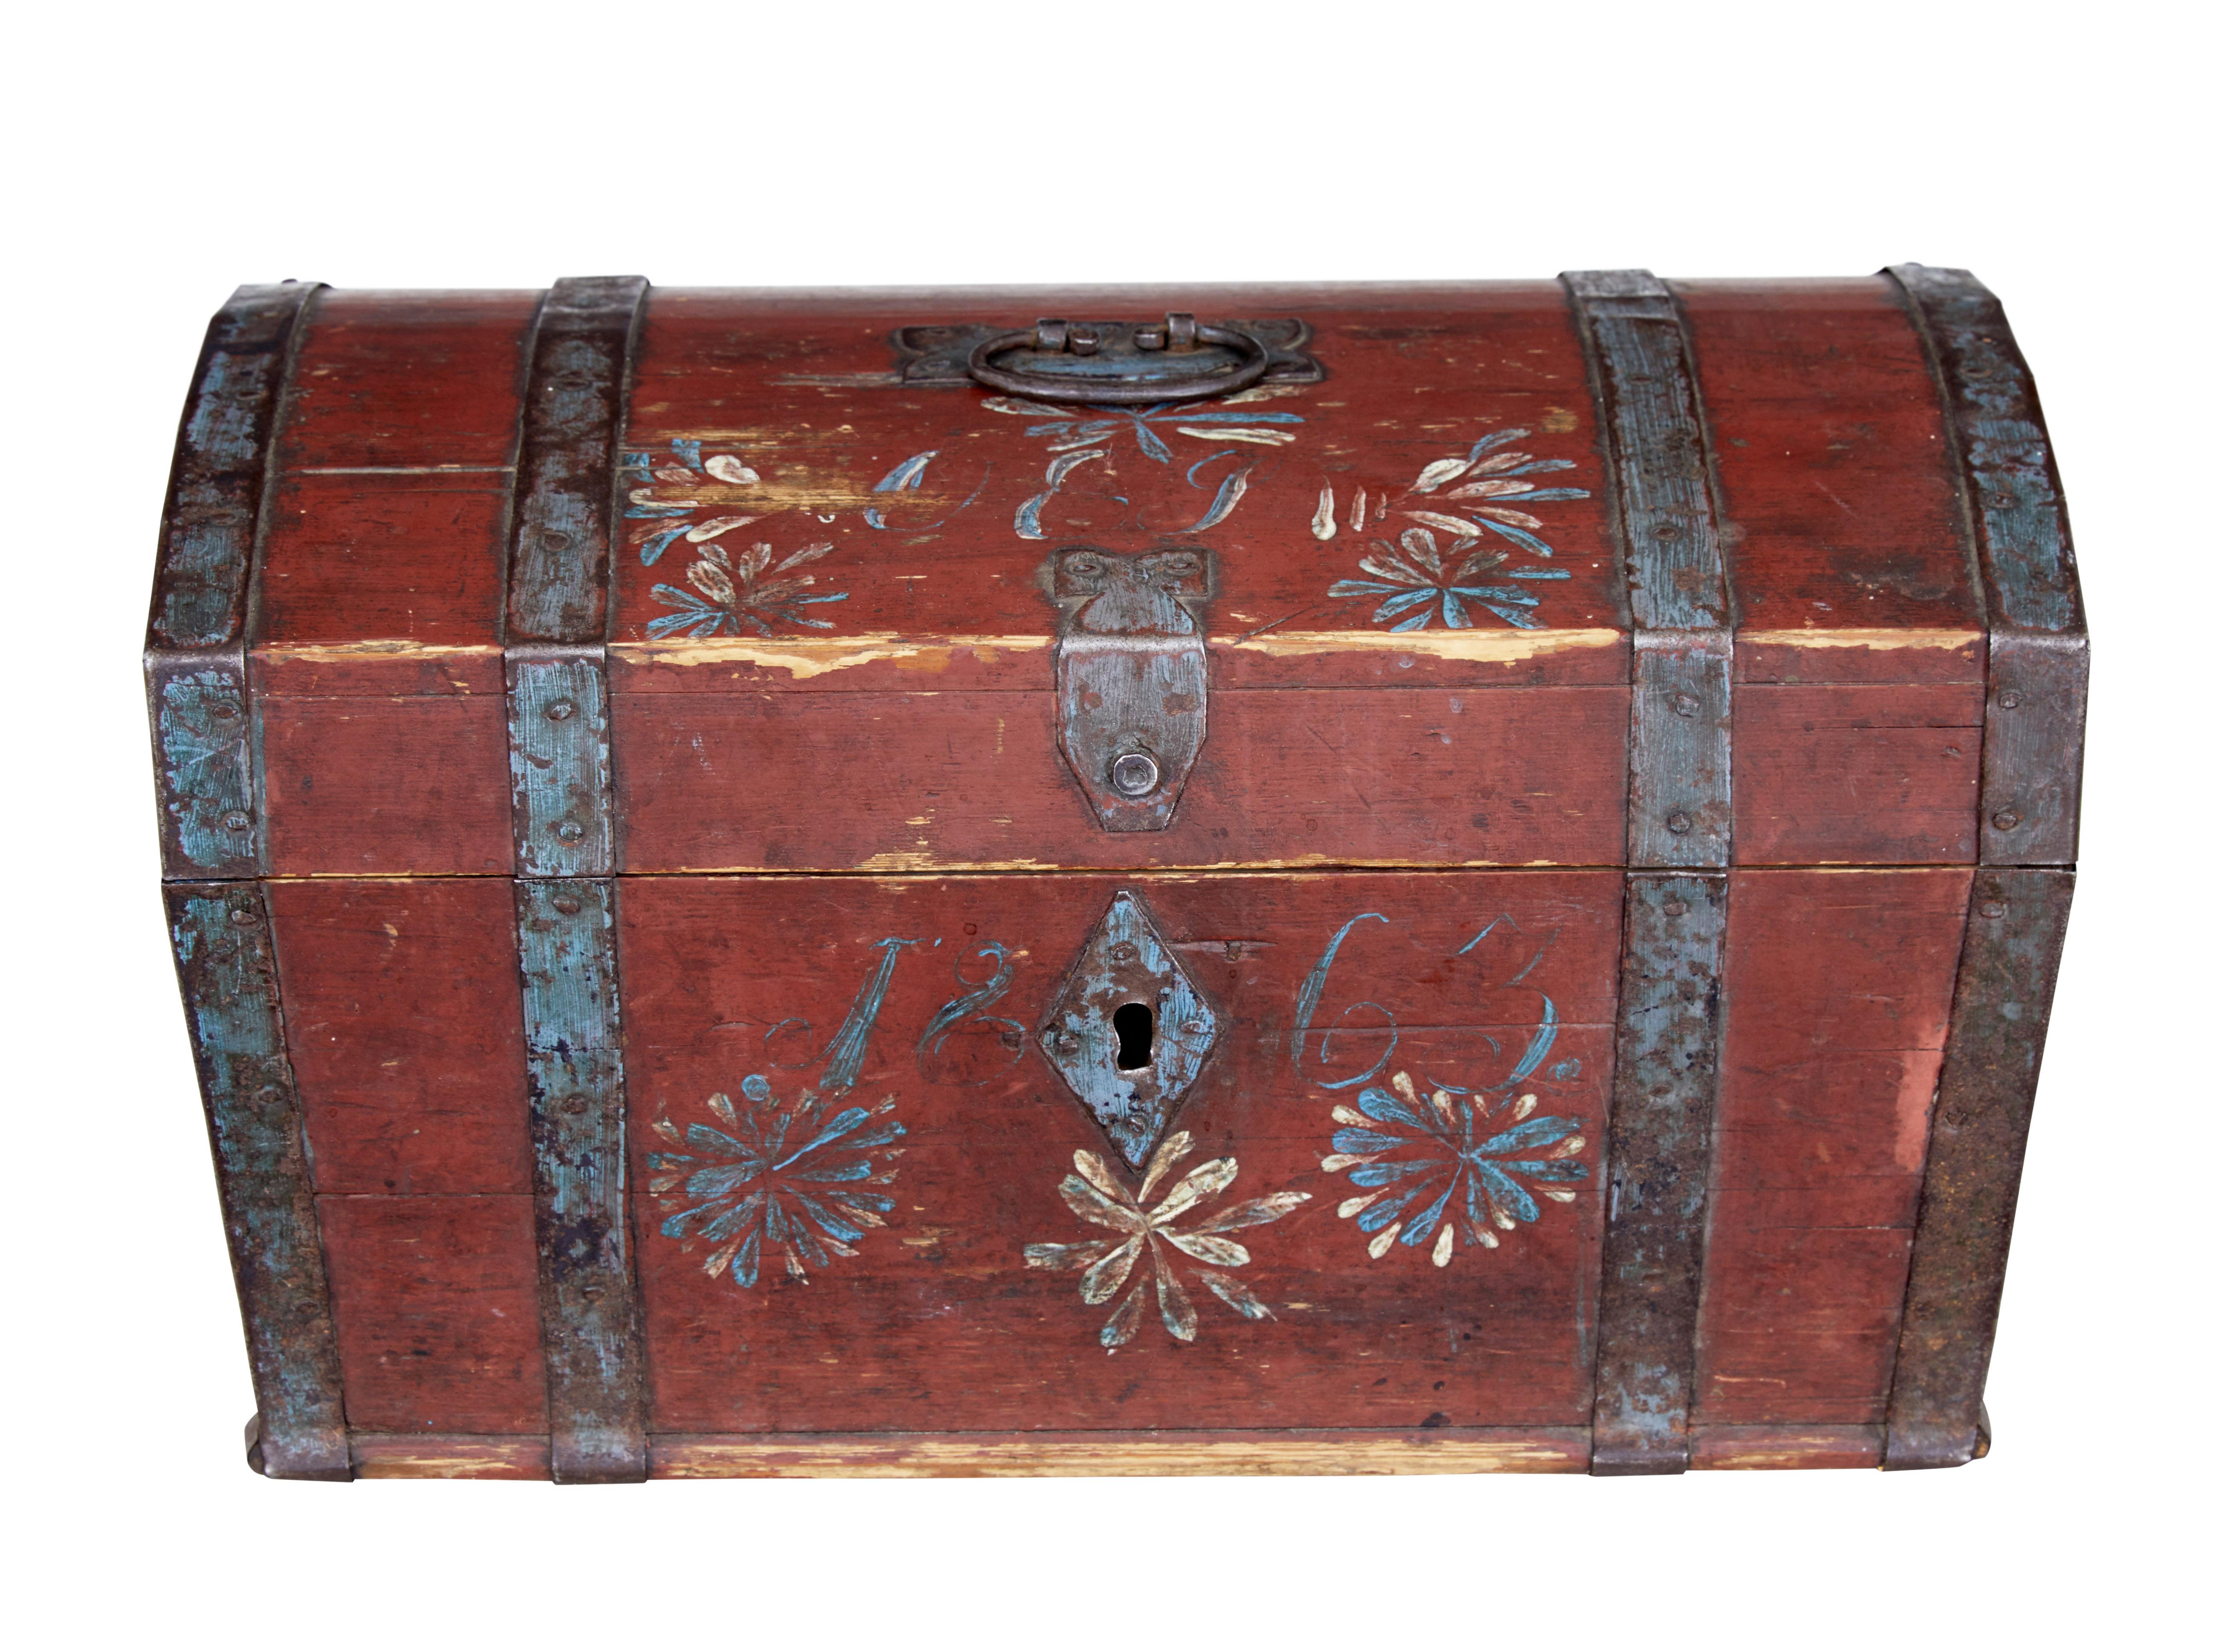 Mid-19th century Swedish pine painted box, circa 1863.

Beautifully little dome top strong box from the 19th century. Presented in its original red paint with decorative hand painted flowers, initials and date.

Metal bound, with handle on the